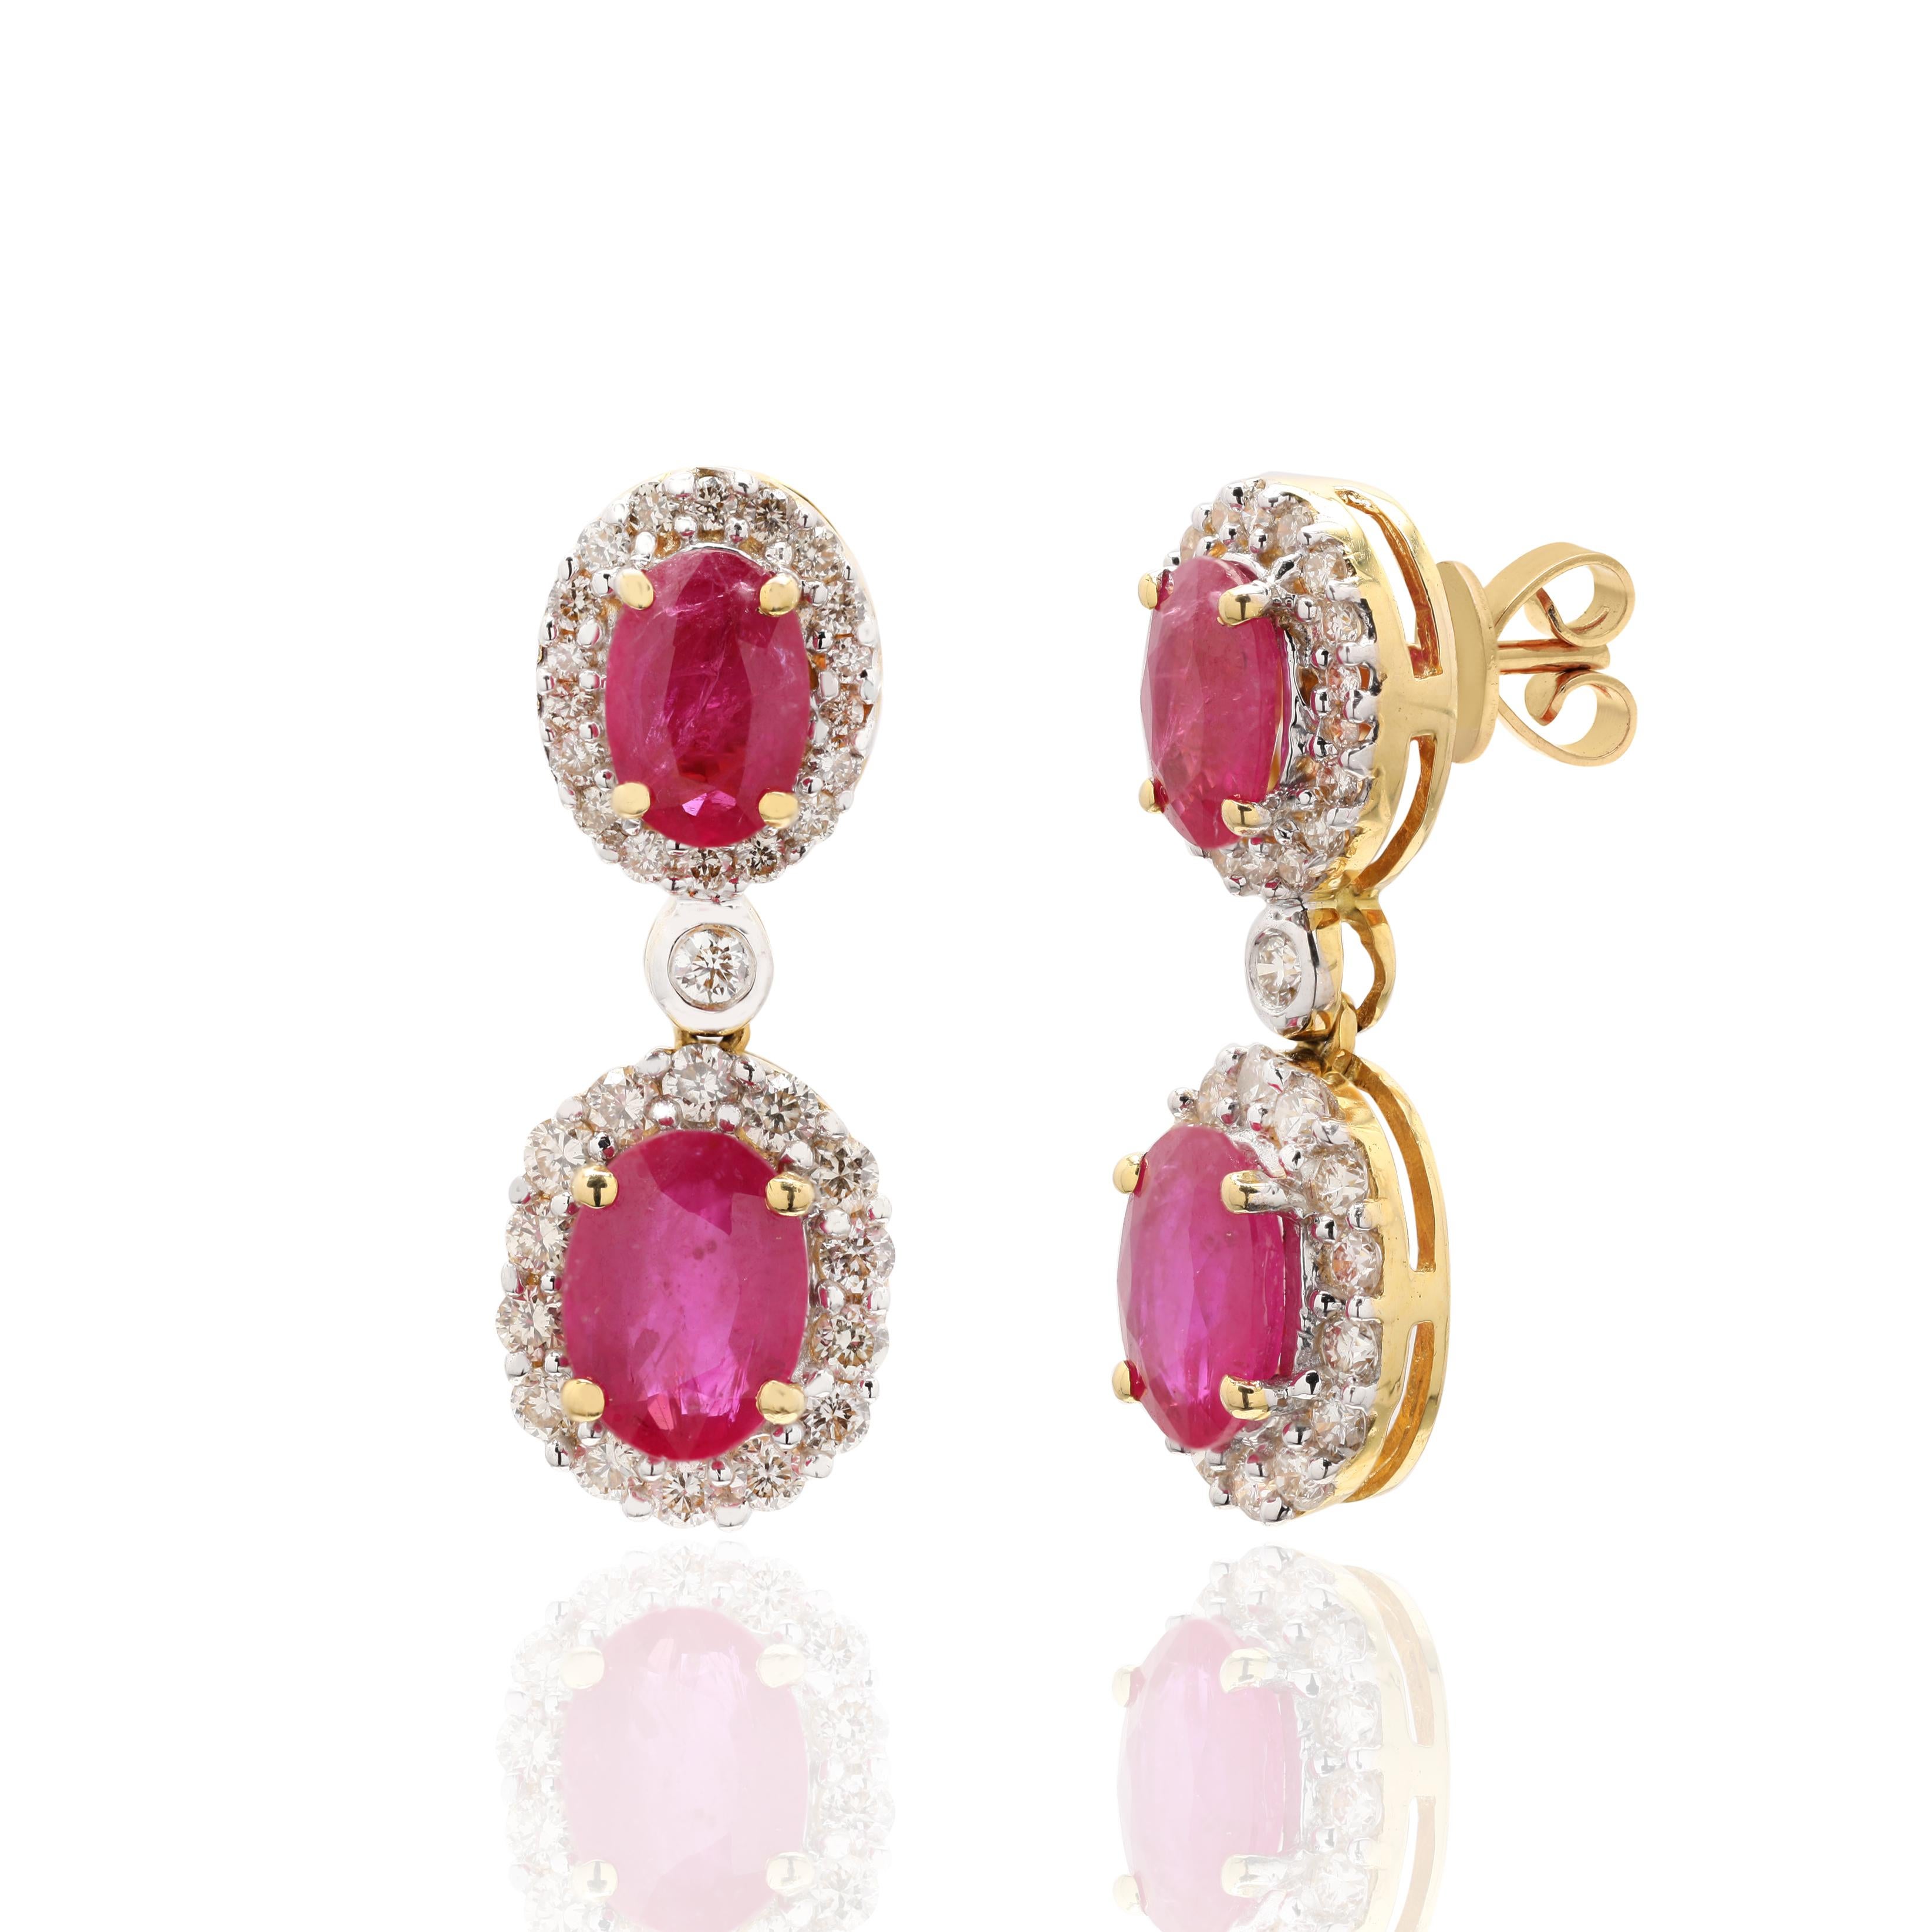 Ruby and Diamond Dangle Wedding Earrings in 18K Gold to make a statement with your look. These earrings create a sparkling, luxurious look featuring oval cut gemstone.
If you love to gravitate towards unique styles, this piece of jewelry is perfect